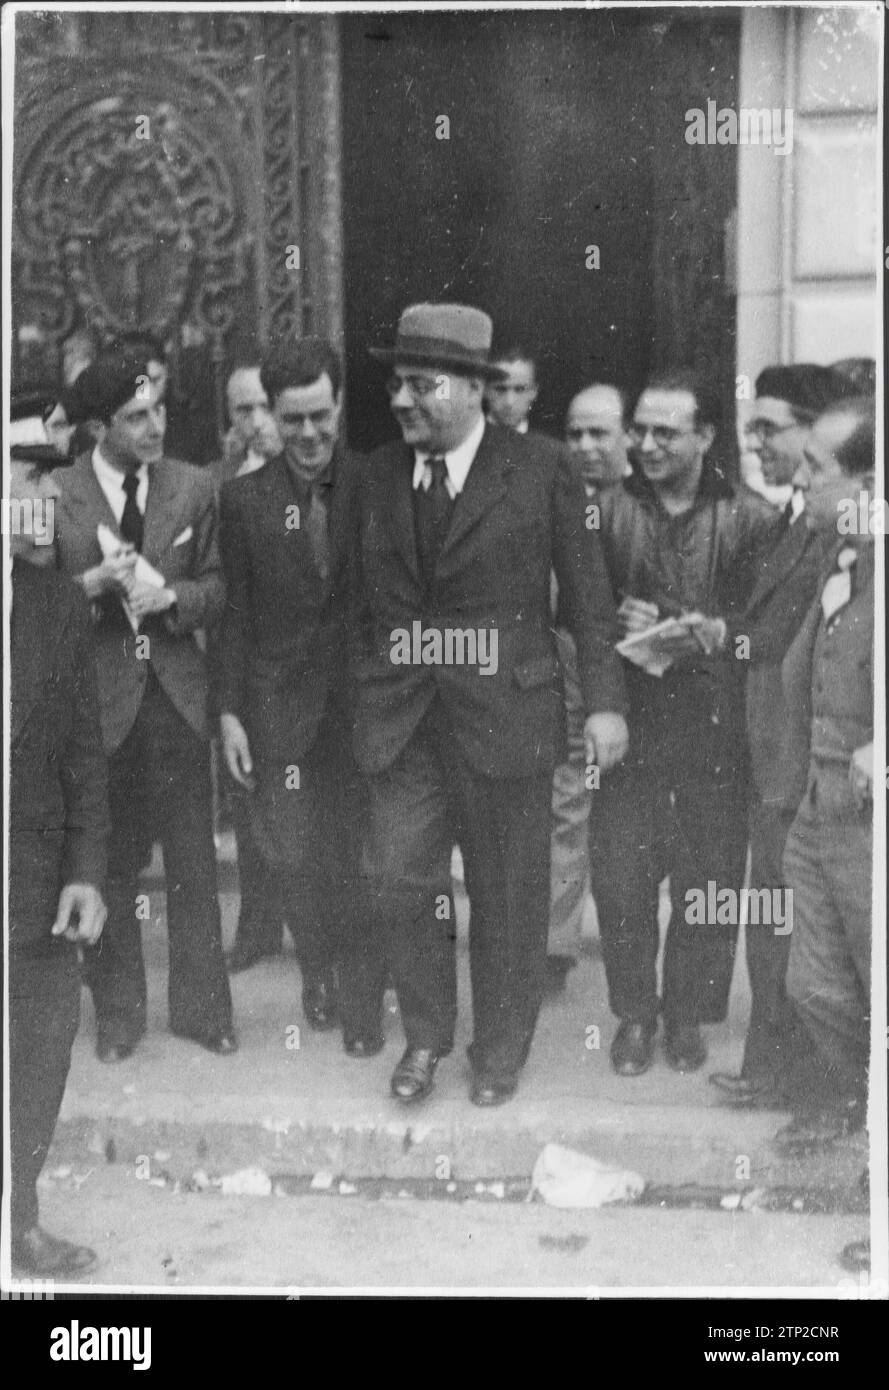 12/31/1936. Don Juan Negrín, the new president of the government of the Spanish Republic, upon leaving the visit made to Mr. Azaña. Credit: Album / Archivo ABC / luis vidal Stock Photo